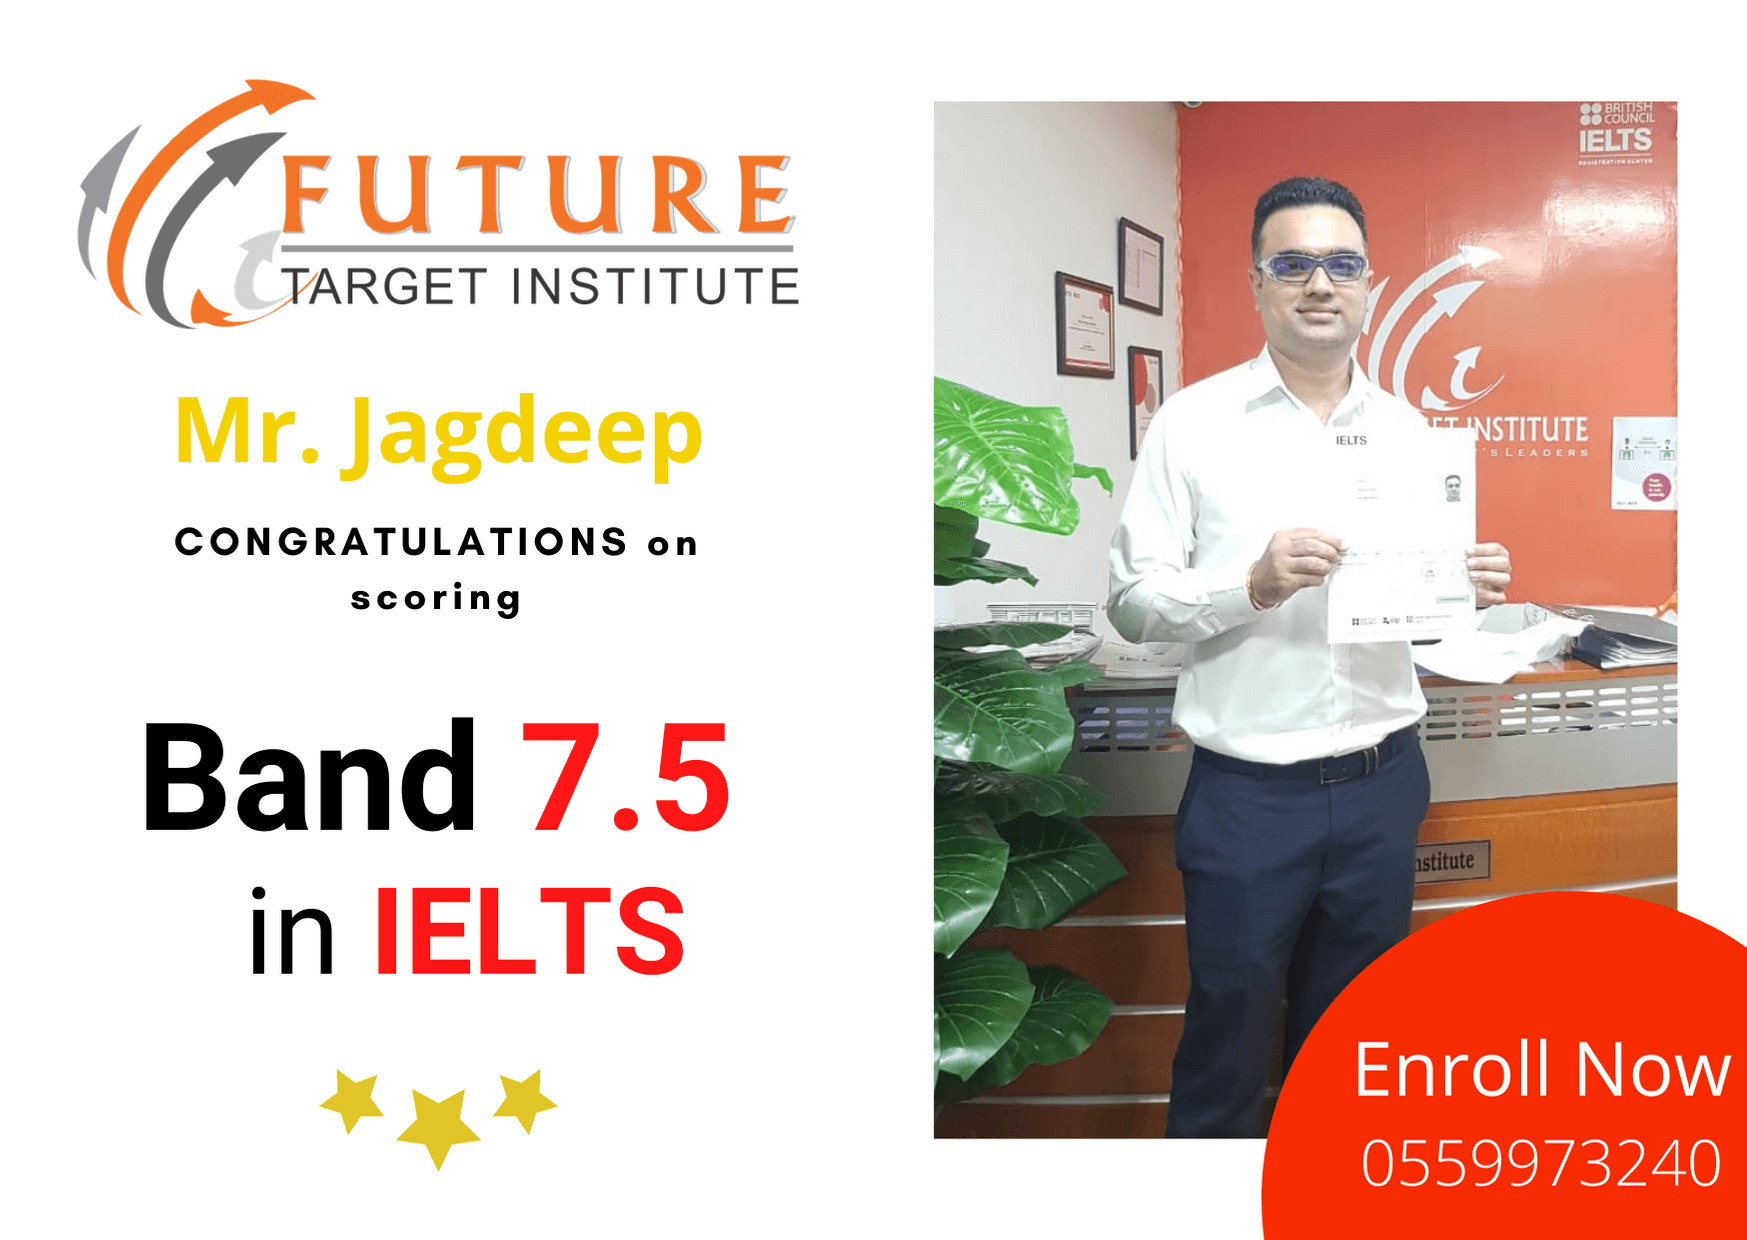 Success story of Mr Ankur who scored Band 8.5 in the IELTS Result with the help of the Certified British Council Teachers at Future Target Institute Dubai.